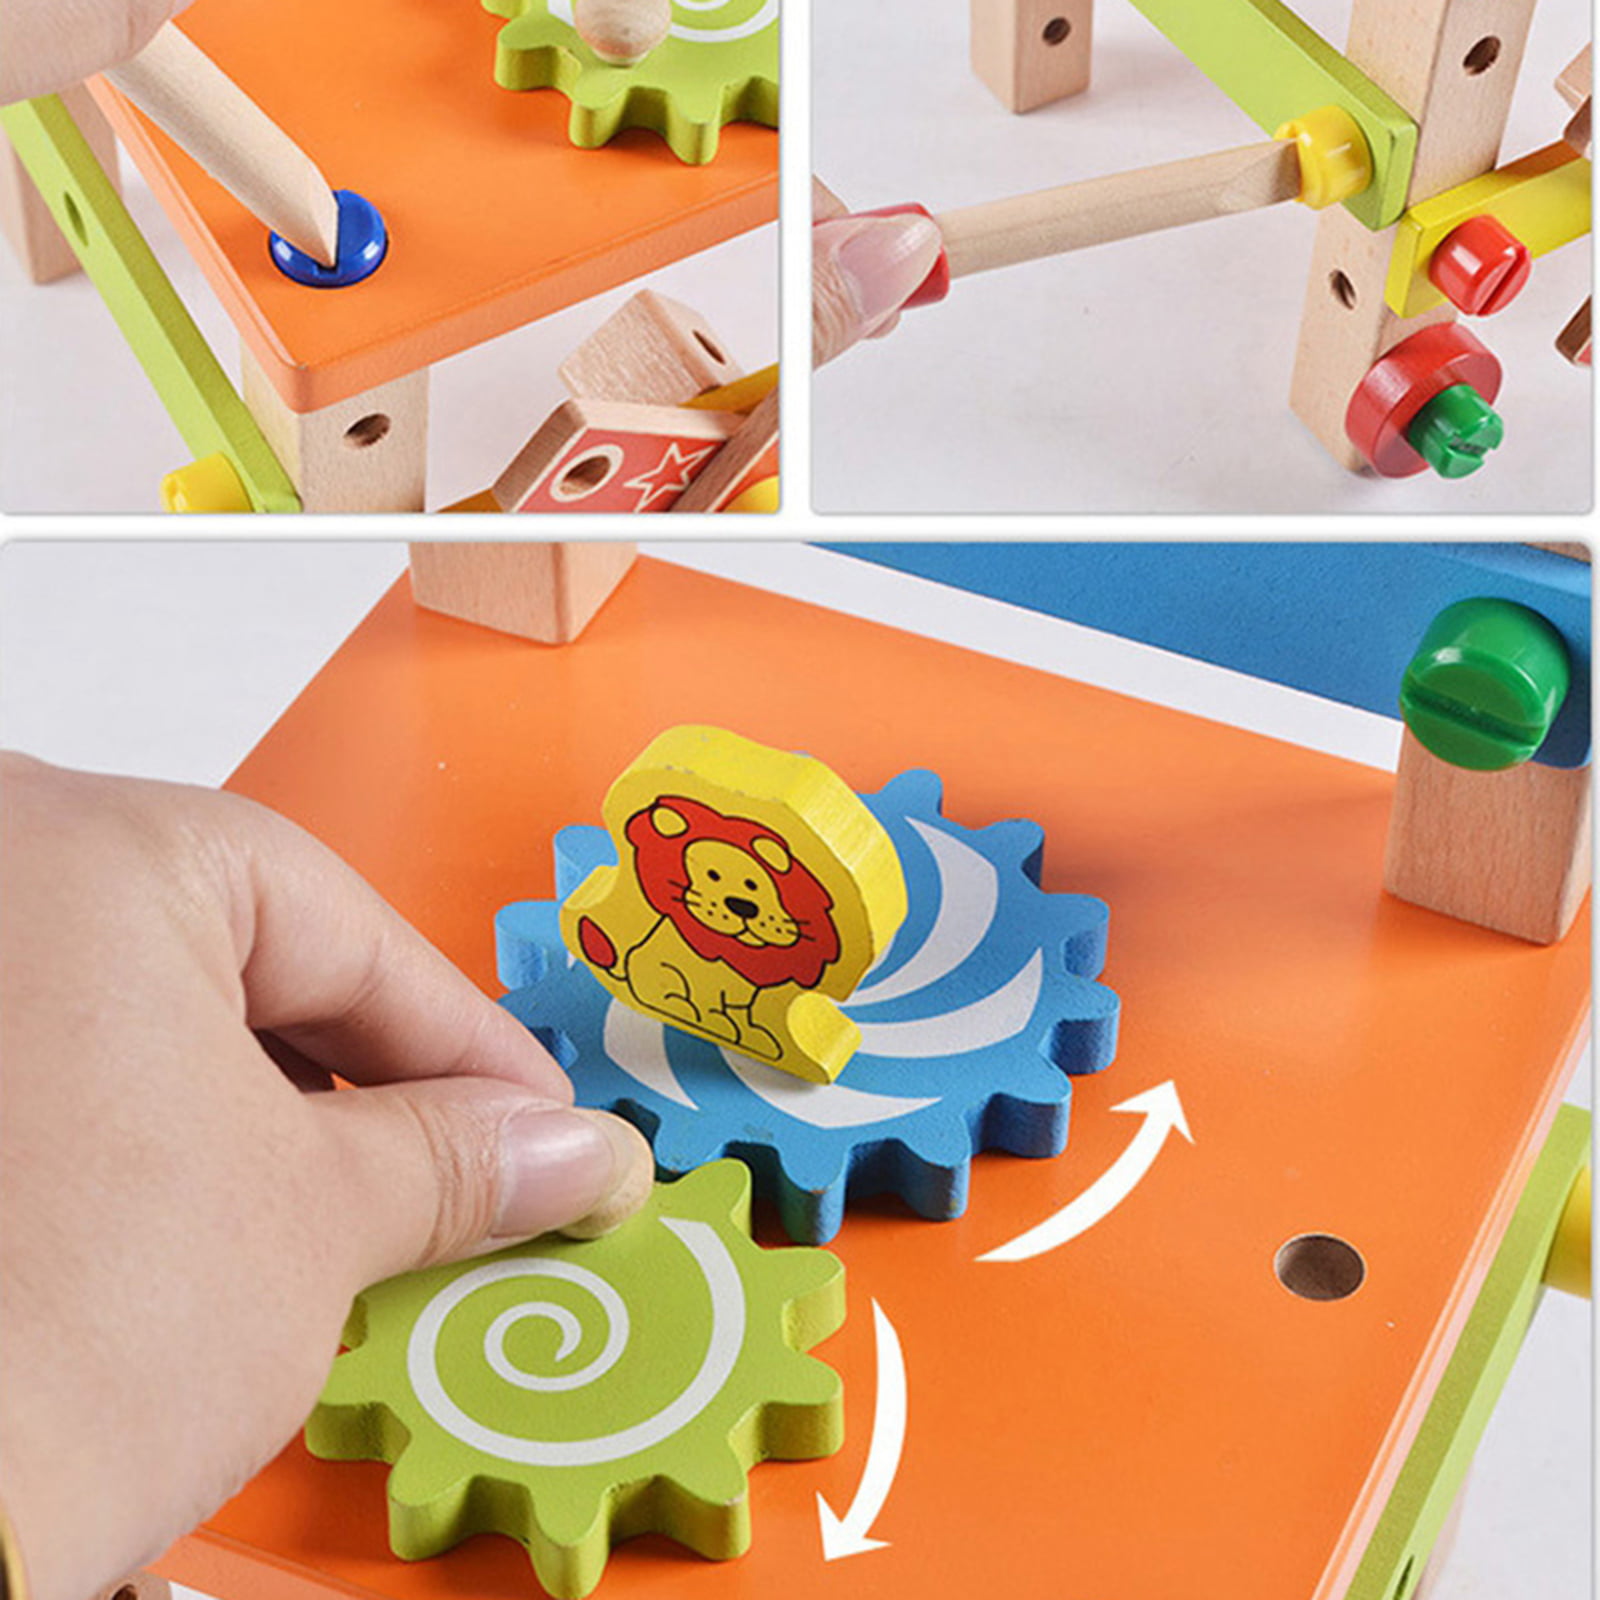 Wooden Assembling Chair Montessori Toys Baby Educational Wooden Toy Learning 